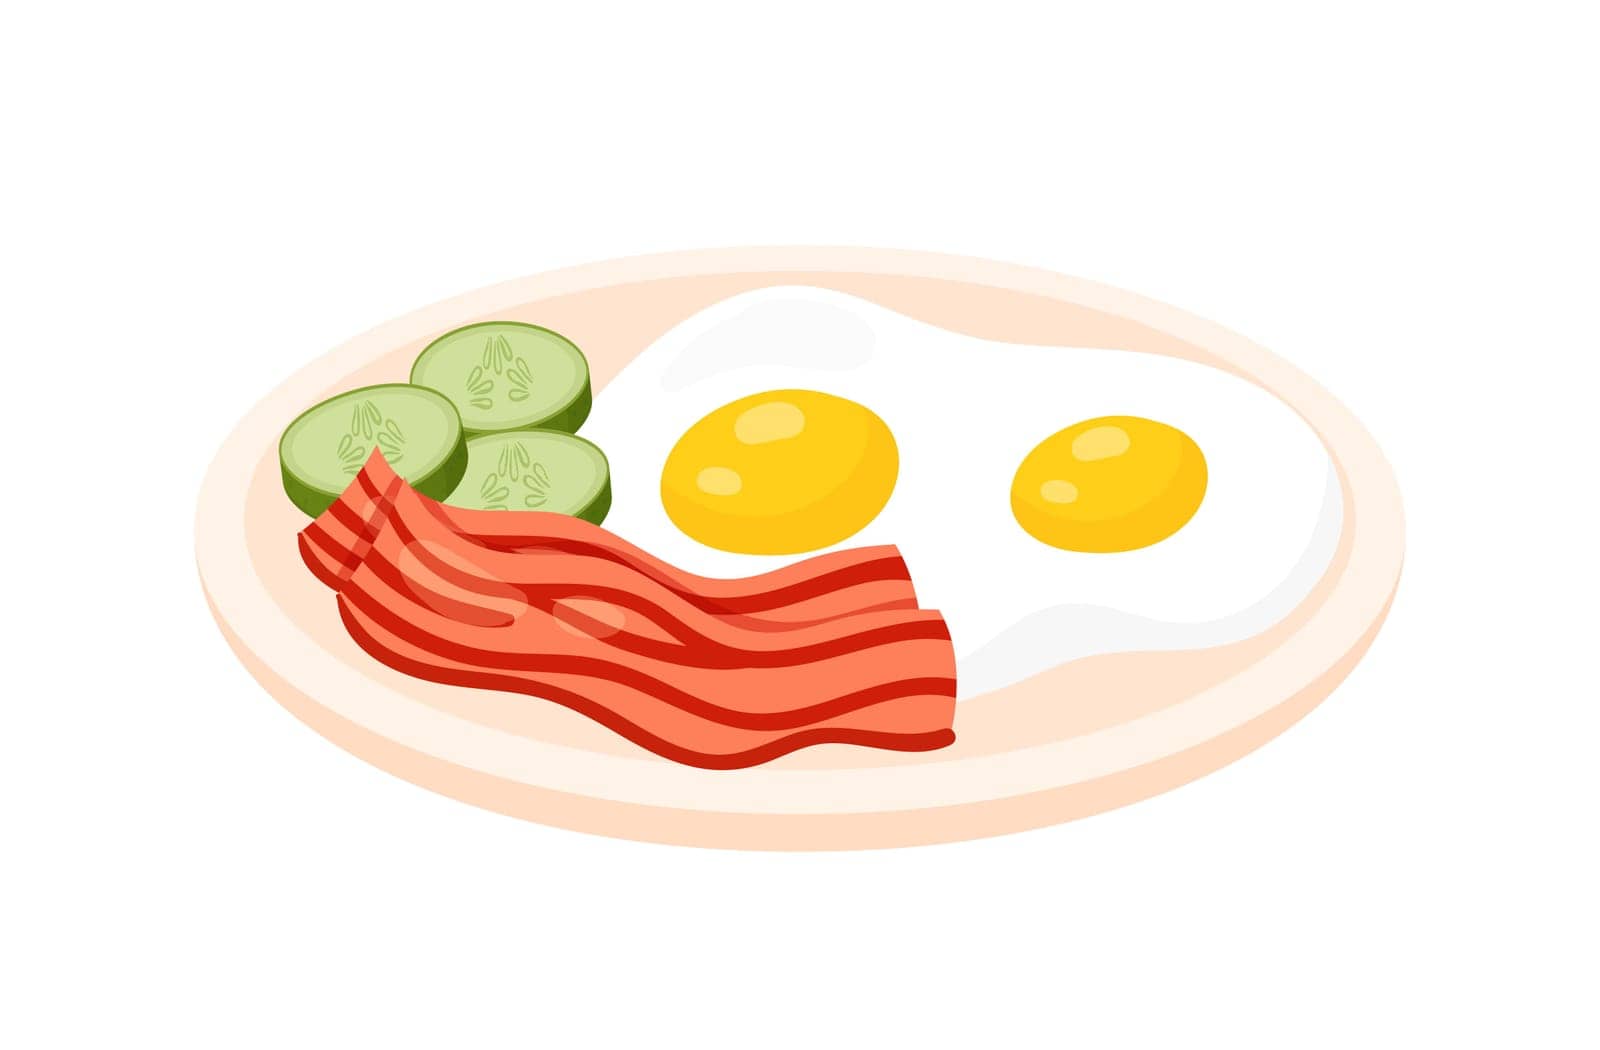 Breakfast plate meal. Fried eggs with bacon, morning dish menu isolated illustration